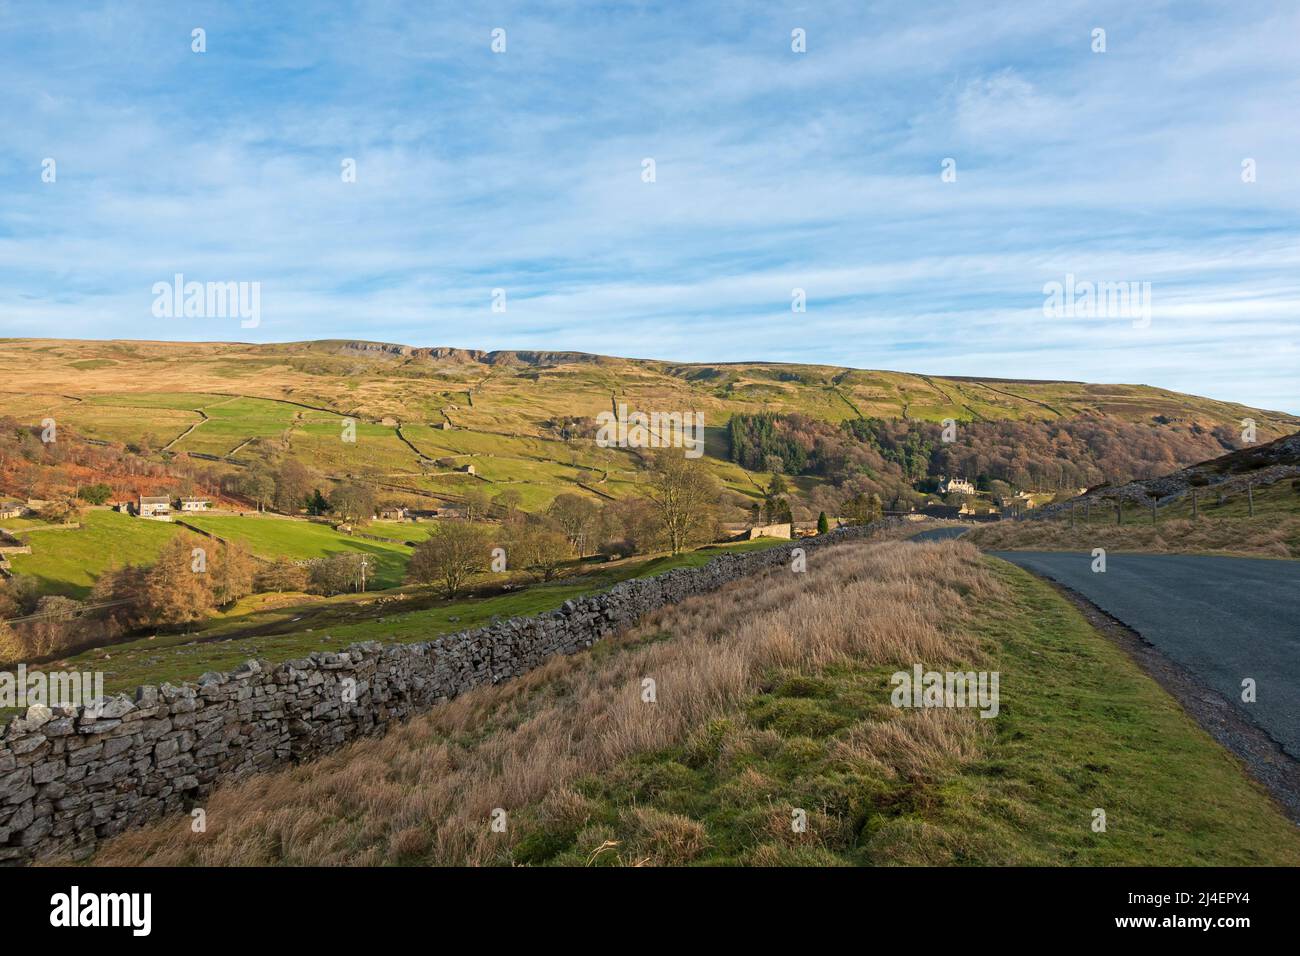 Arkengarthdale, Yorkshire Dales National Park, In winter the fields are still green, although areas of bracken and heather are rust and gold. Stock Photo